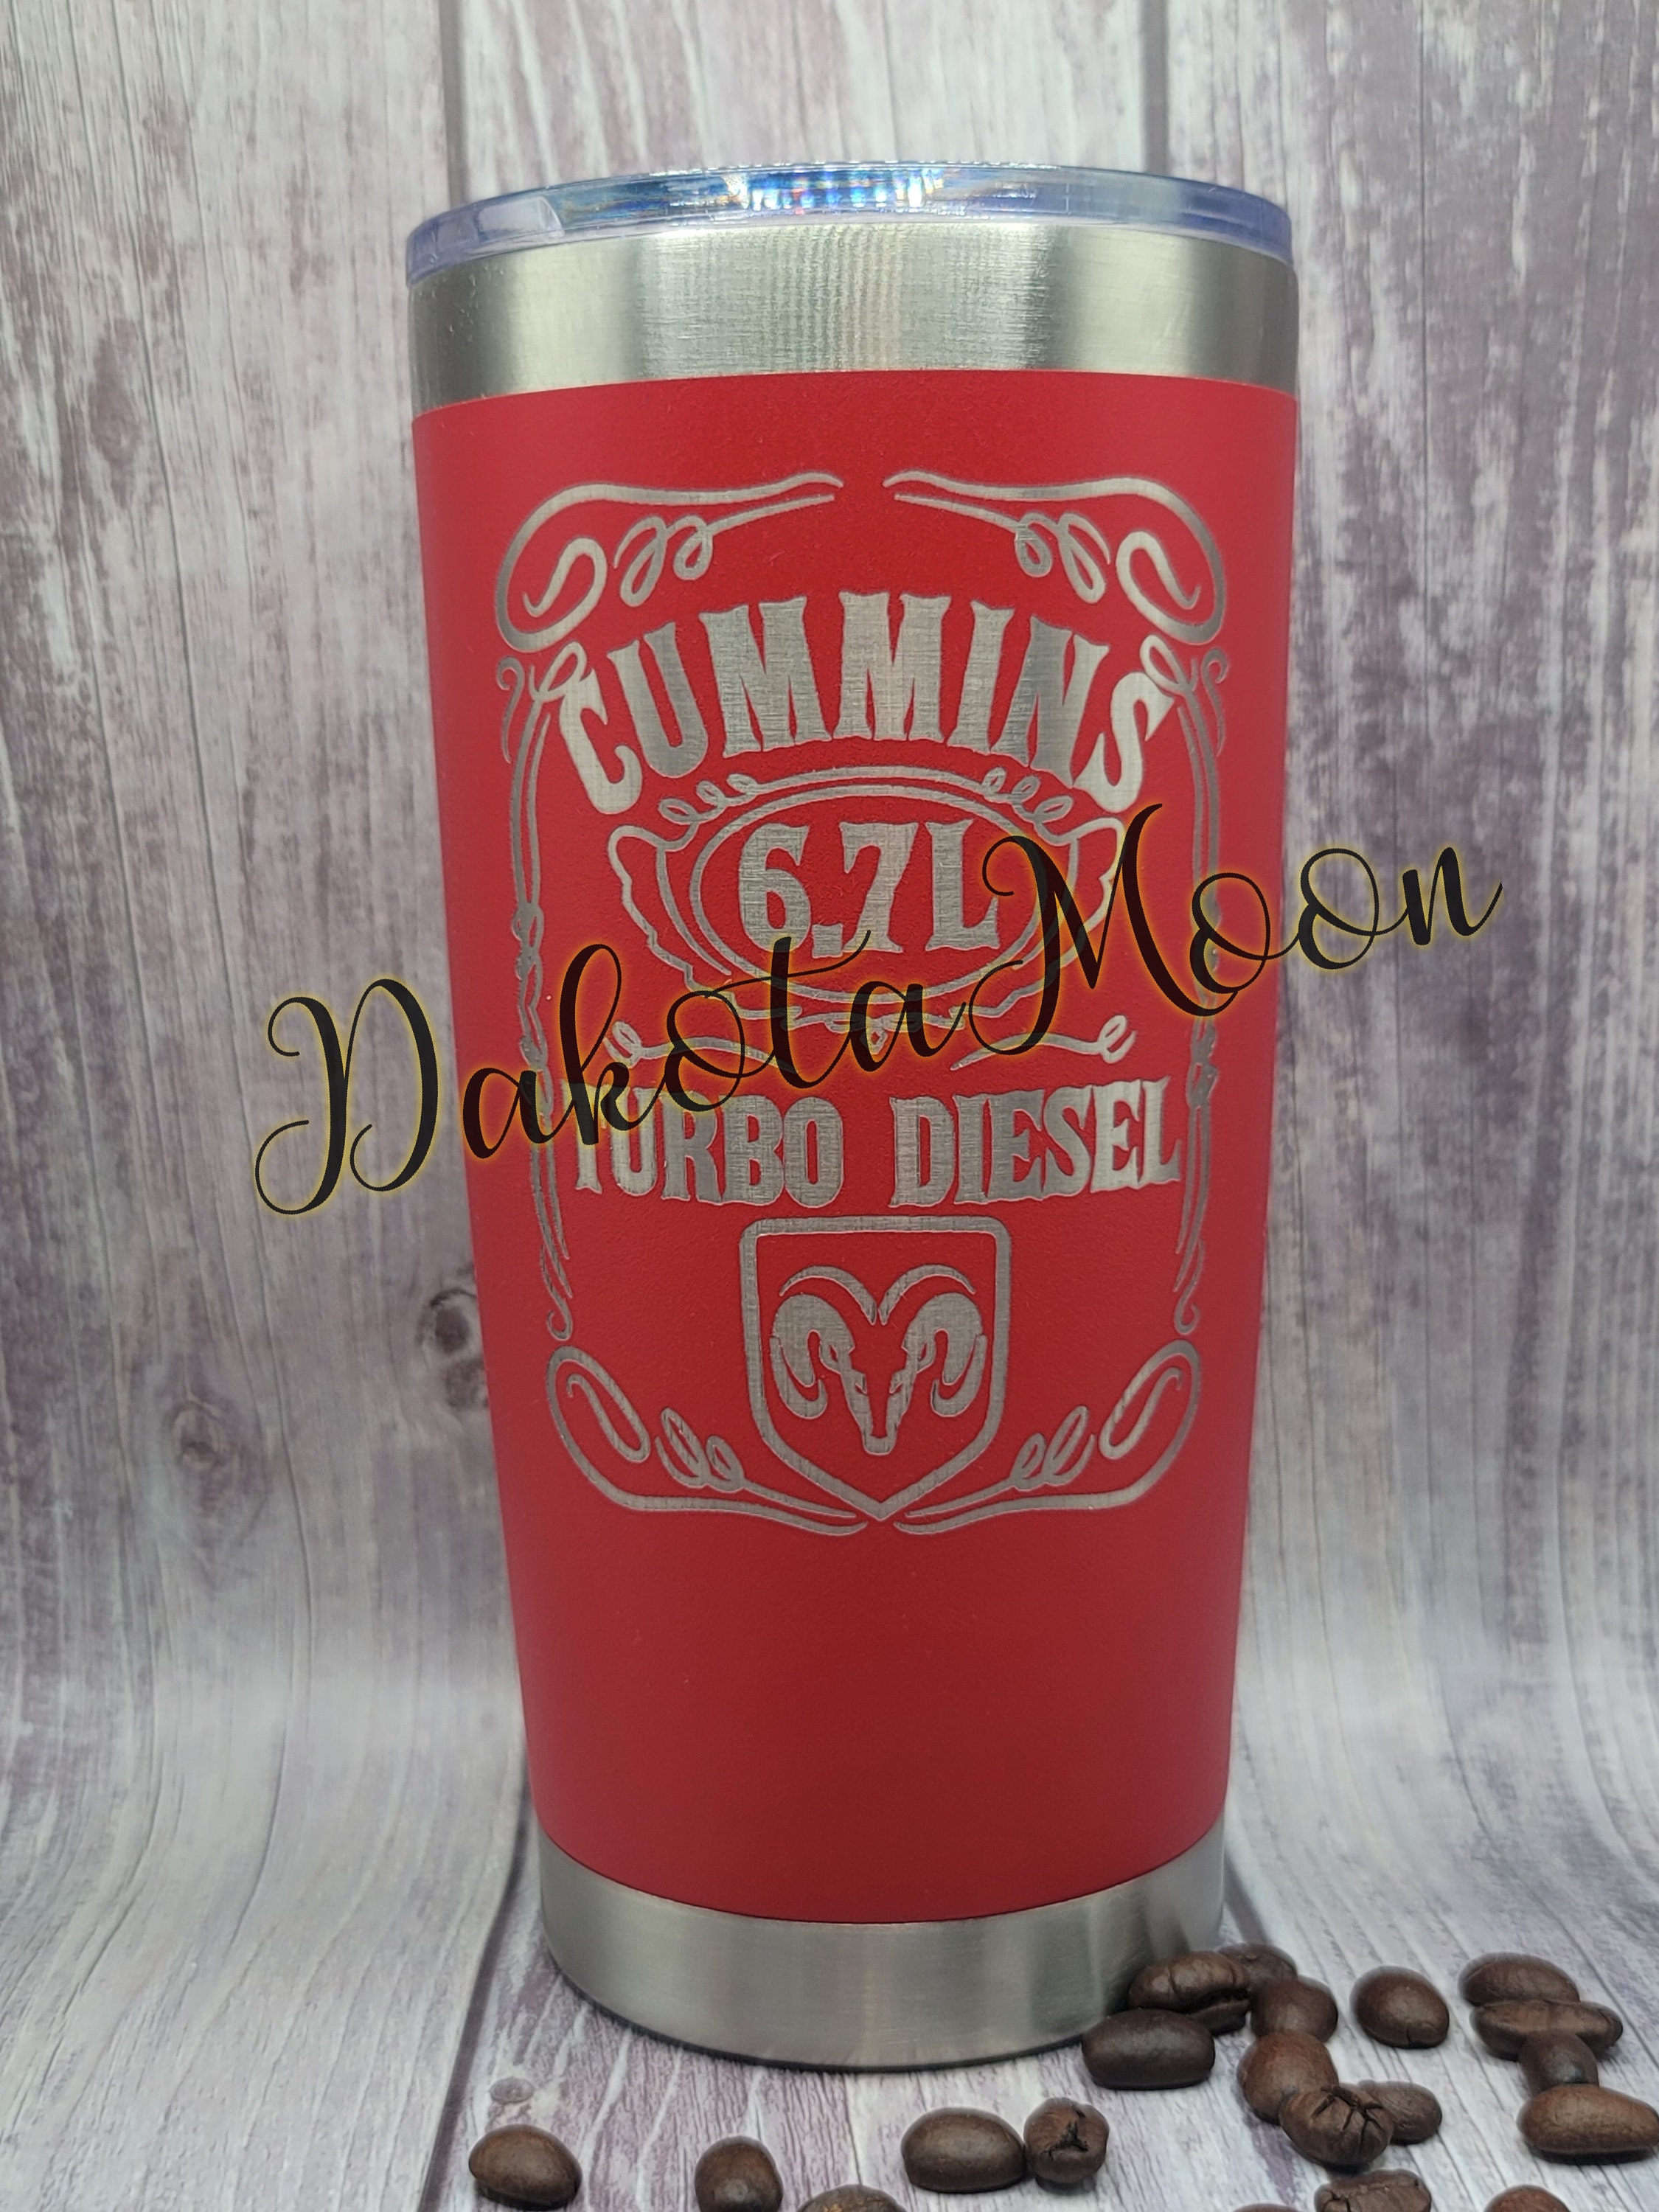 Cummins diesel insulated coffee cup mug thermos red black hot cold